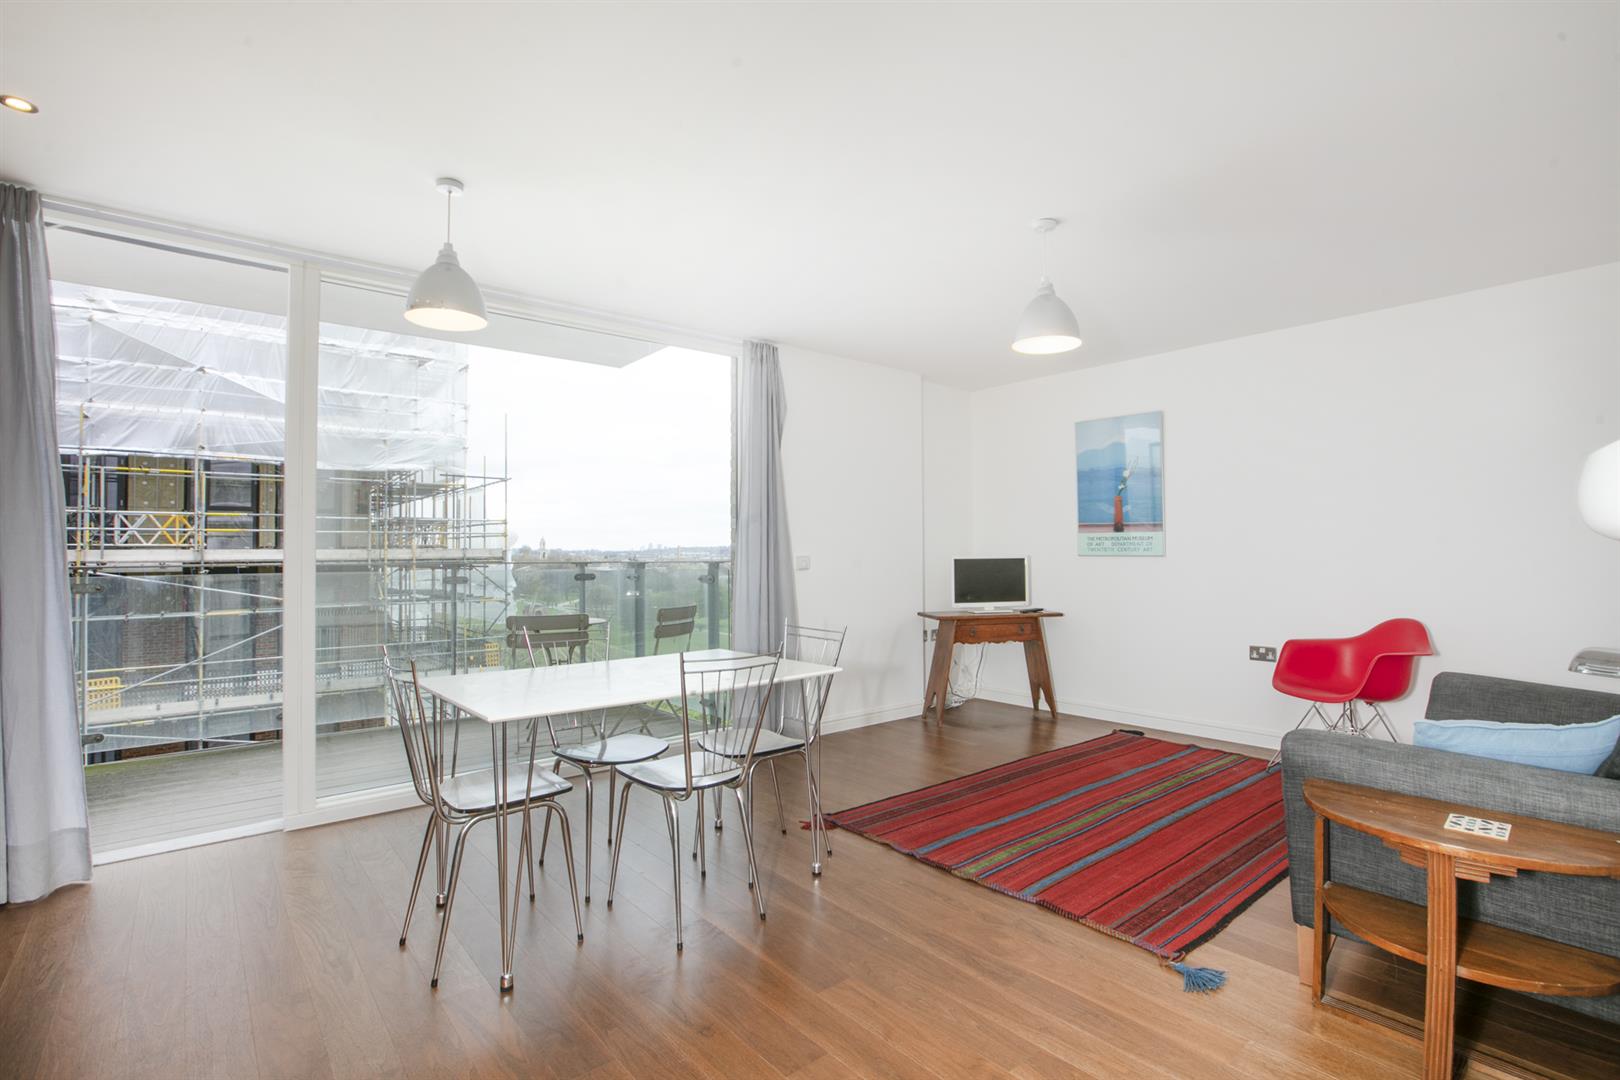 Flat - Purpose Built Under Offer in Albany Road, Camberwell, SE5 926 view7